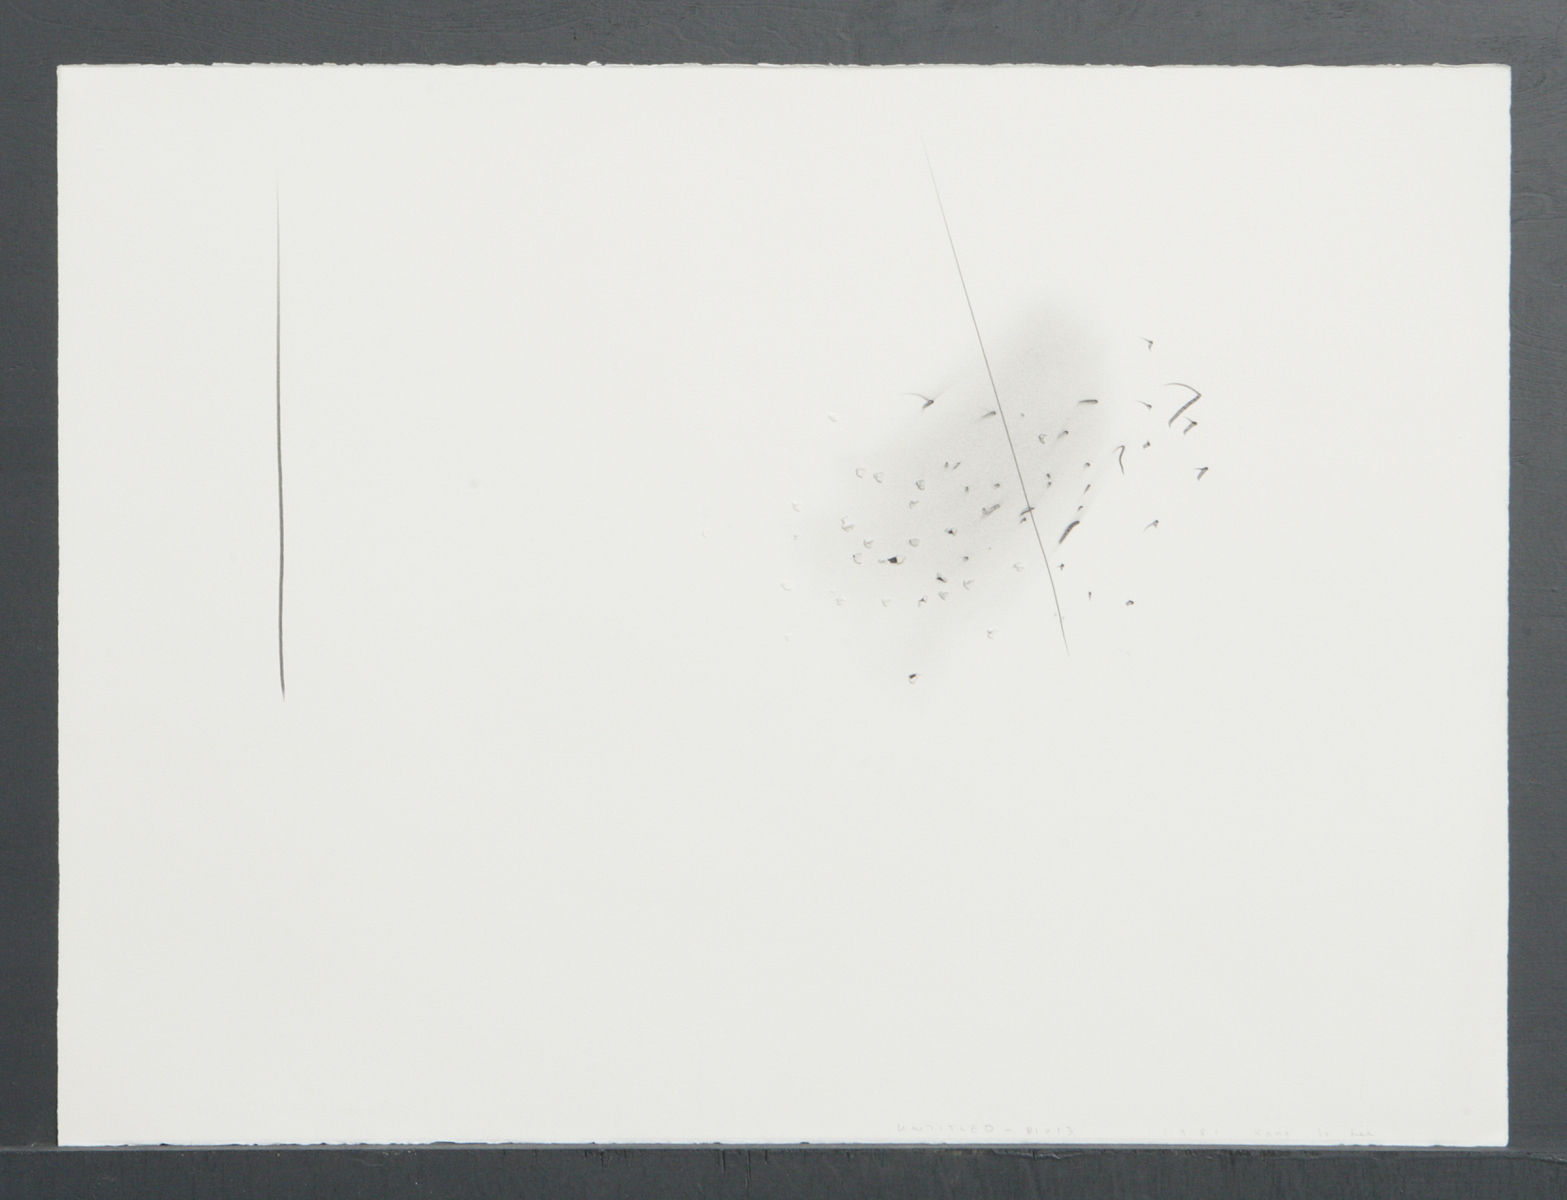 Untitled-81013, 1981, Pencil on Paper, 56x76cm